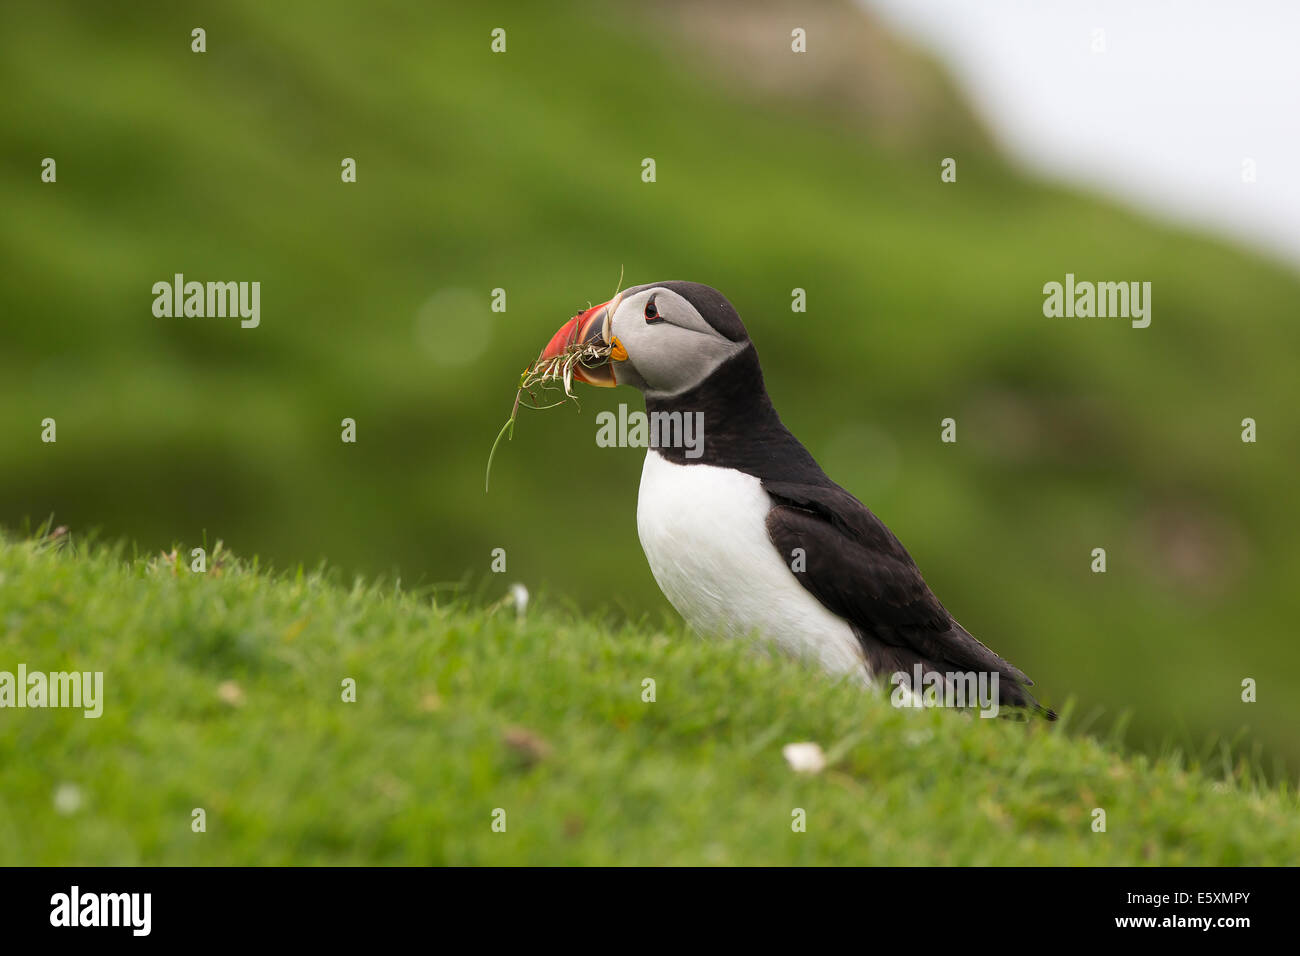 Puffin, Fratercula collecting nesting materials Stock Photo